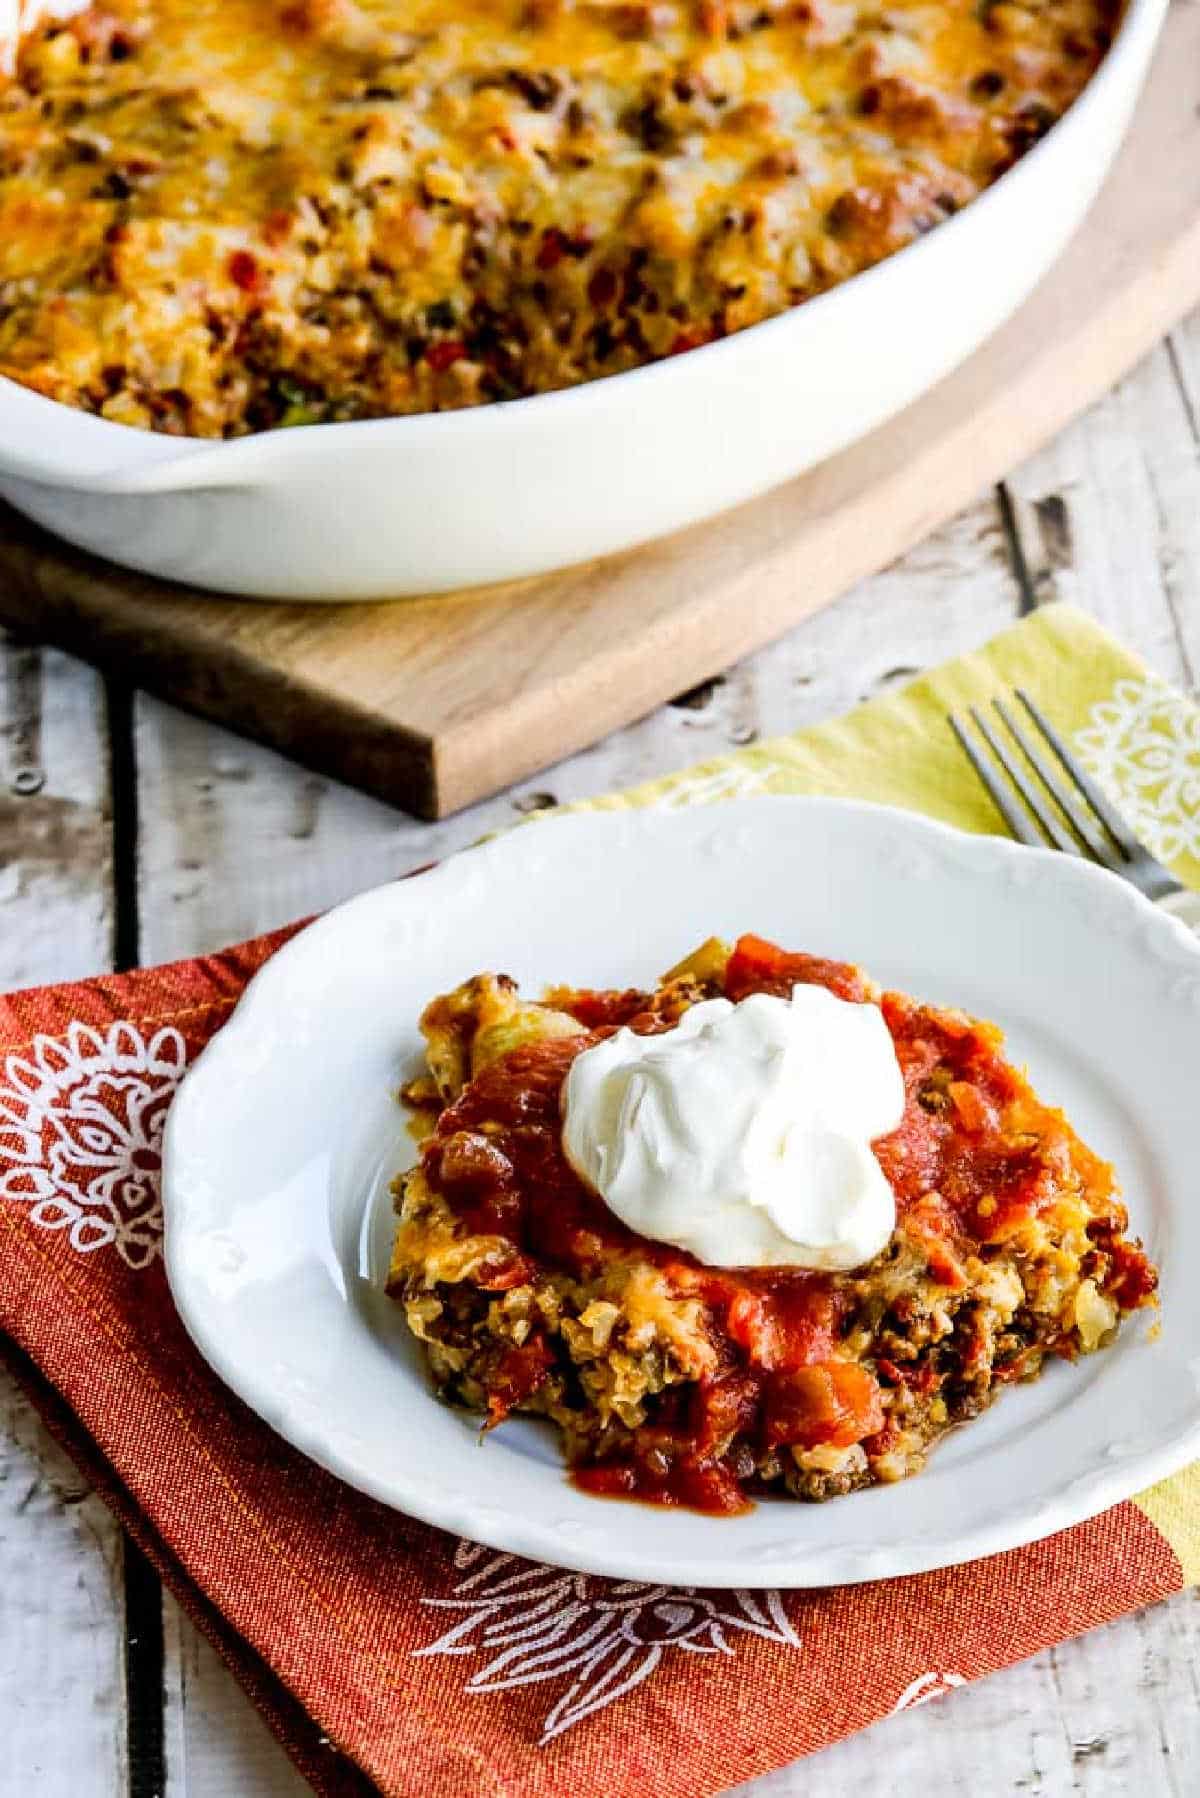 Cheesy Low-Carb Taco Casserole shown in baking dish with one serving on plate